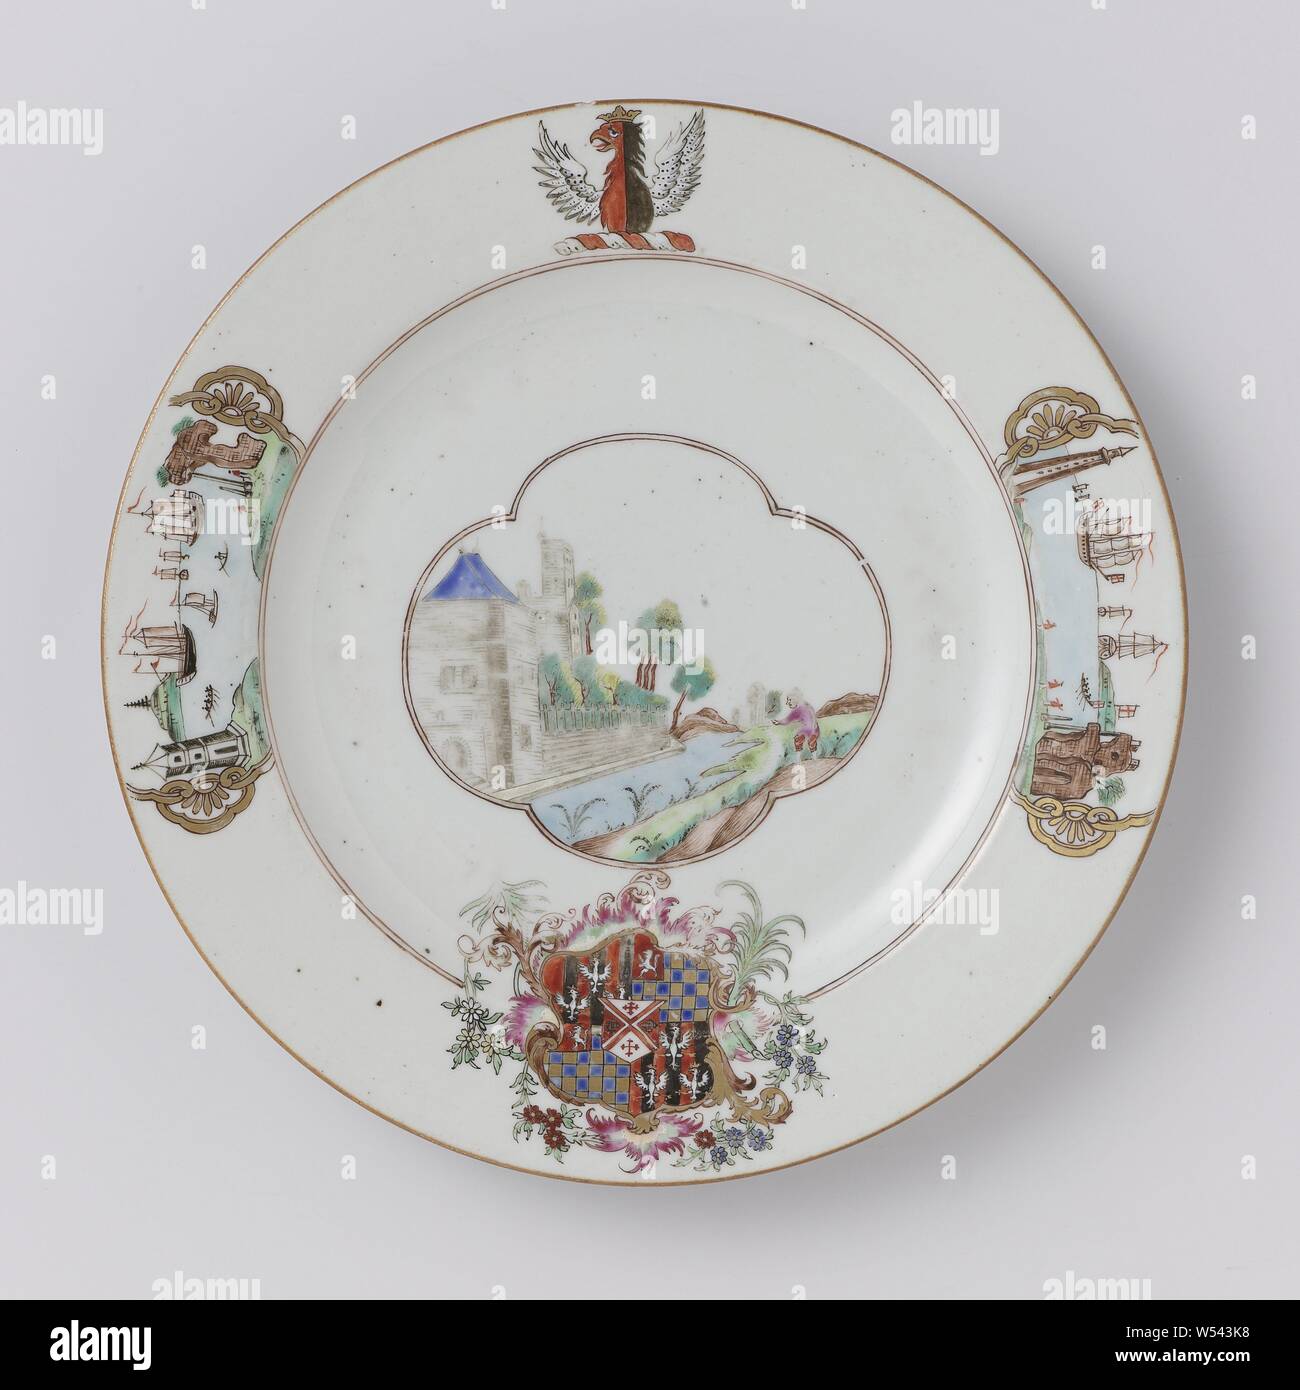 Plate with the arms of the Cooke, Twysden and Warren family, Porcelain plate, painted on the glaze in blue, red, pink, green, yellow, brown, black and gold. On the shelf a lobed cartouche with a European landscape with a fortress and a person on the waterfront, on the wall and border the coat of arms of the Warren and Cooke family with the coat of arms of the Twysden family in the heart. The weapon is divided into four planes: 1. and 4. three crowned birds on a red-black striped background, 2. and 3. a checkered ground in blue and gold with a lion in the left corner against a red background Stock Photo